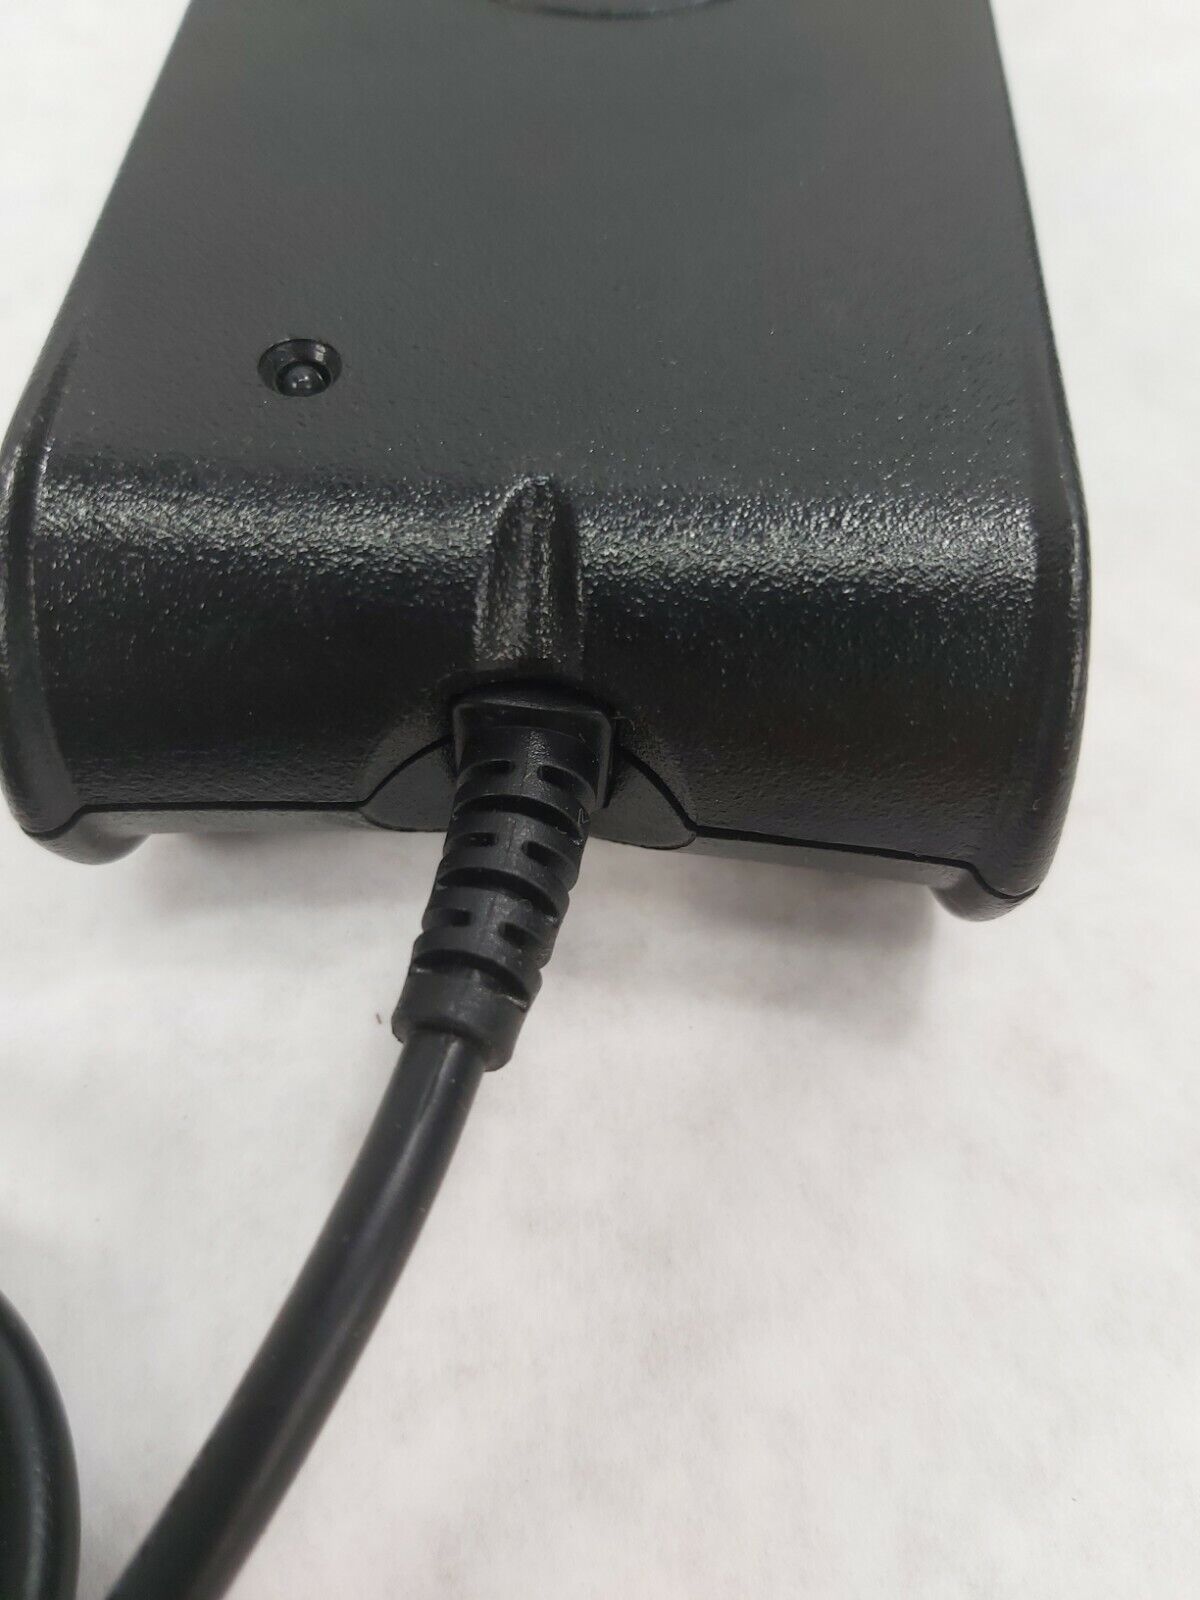 Genuine Dell LA90PS0-00 DF266 PA1900 AC Power Adapter Charger 90W 19.5V 4.62A